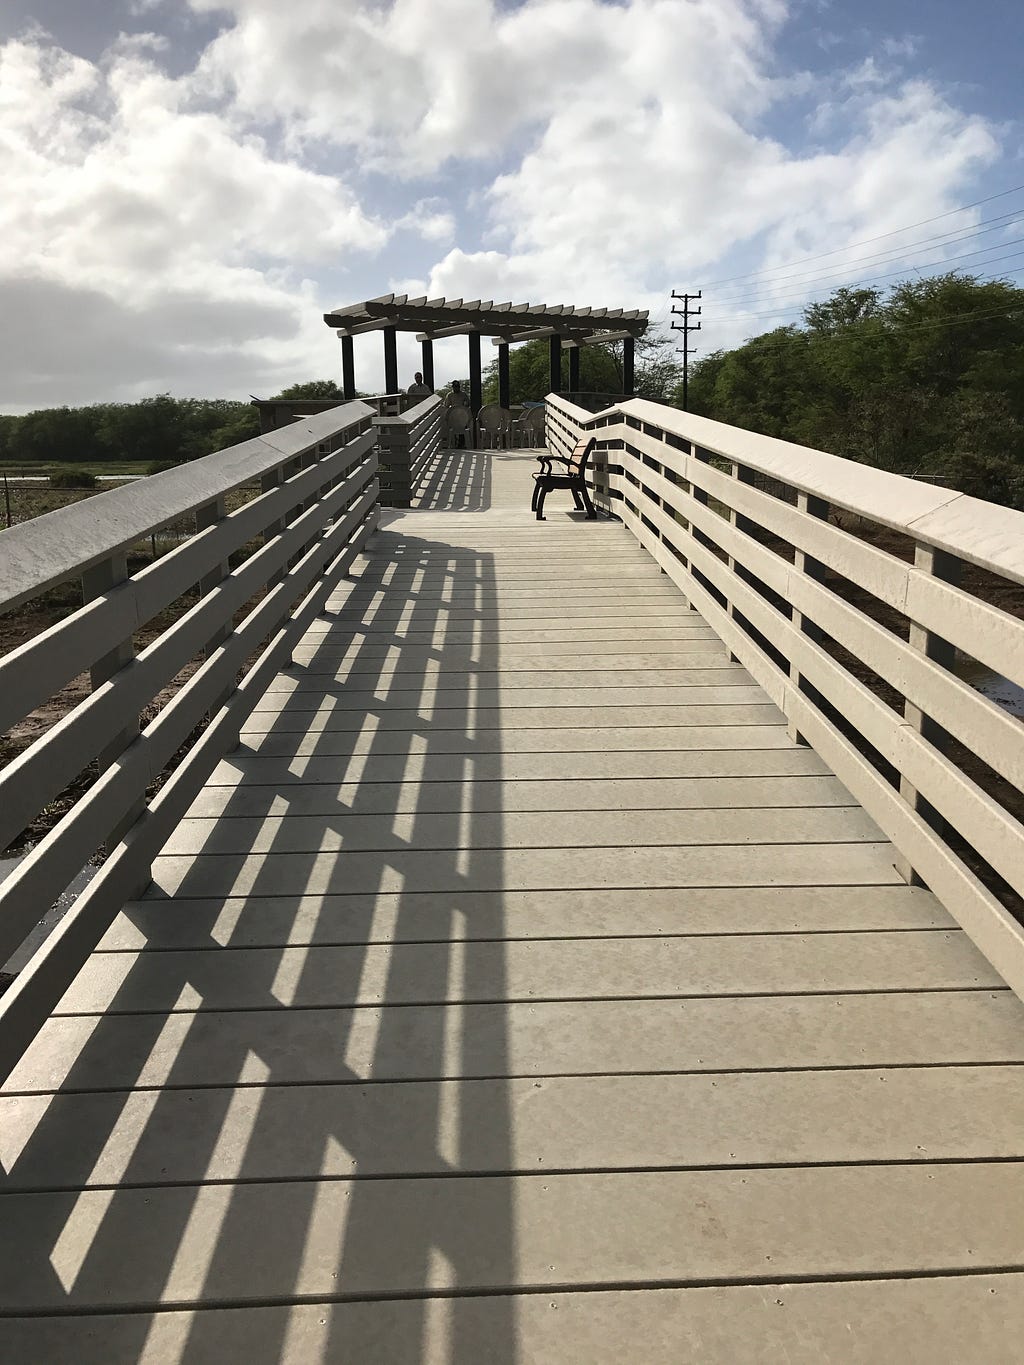 The walkway to the Betty Nagamine Bliss Overlook taken on the day of the commemoration ceremony. It leads to a covered lookout that overlooks the wetlands at Pearl Harbor National Wildlife Refuge.